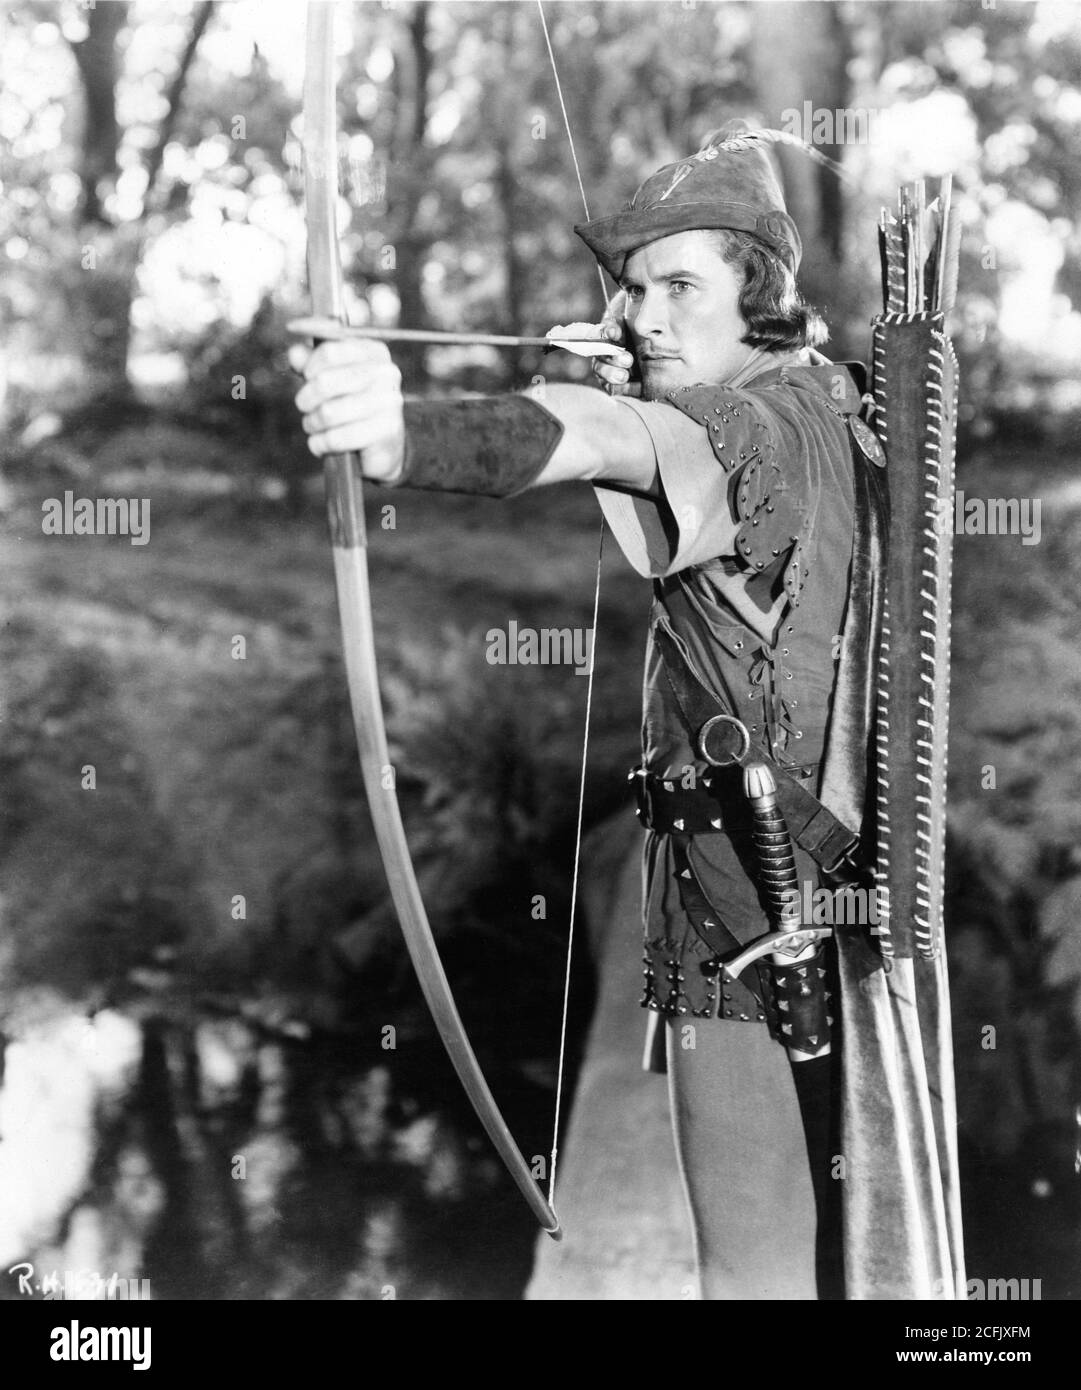 ERROL FLYNN with bow and arrow in THE ADVENTURES OF ROBIN HOOD 1938 directors MICHAEL CURTIZ and WILLIAM KEIGHLEY music Erich Wolfgang Korngold Warner Bros. Stock Photo